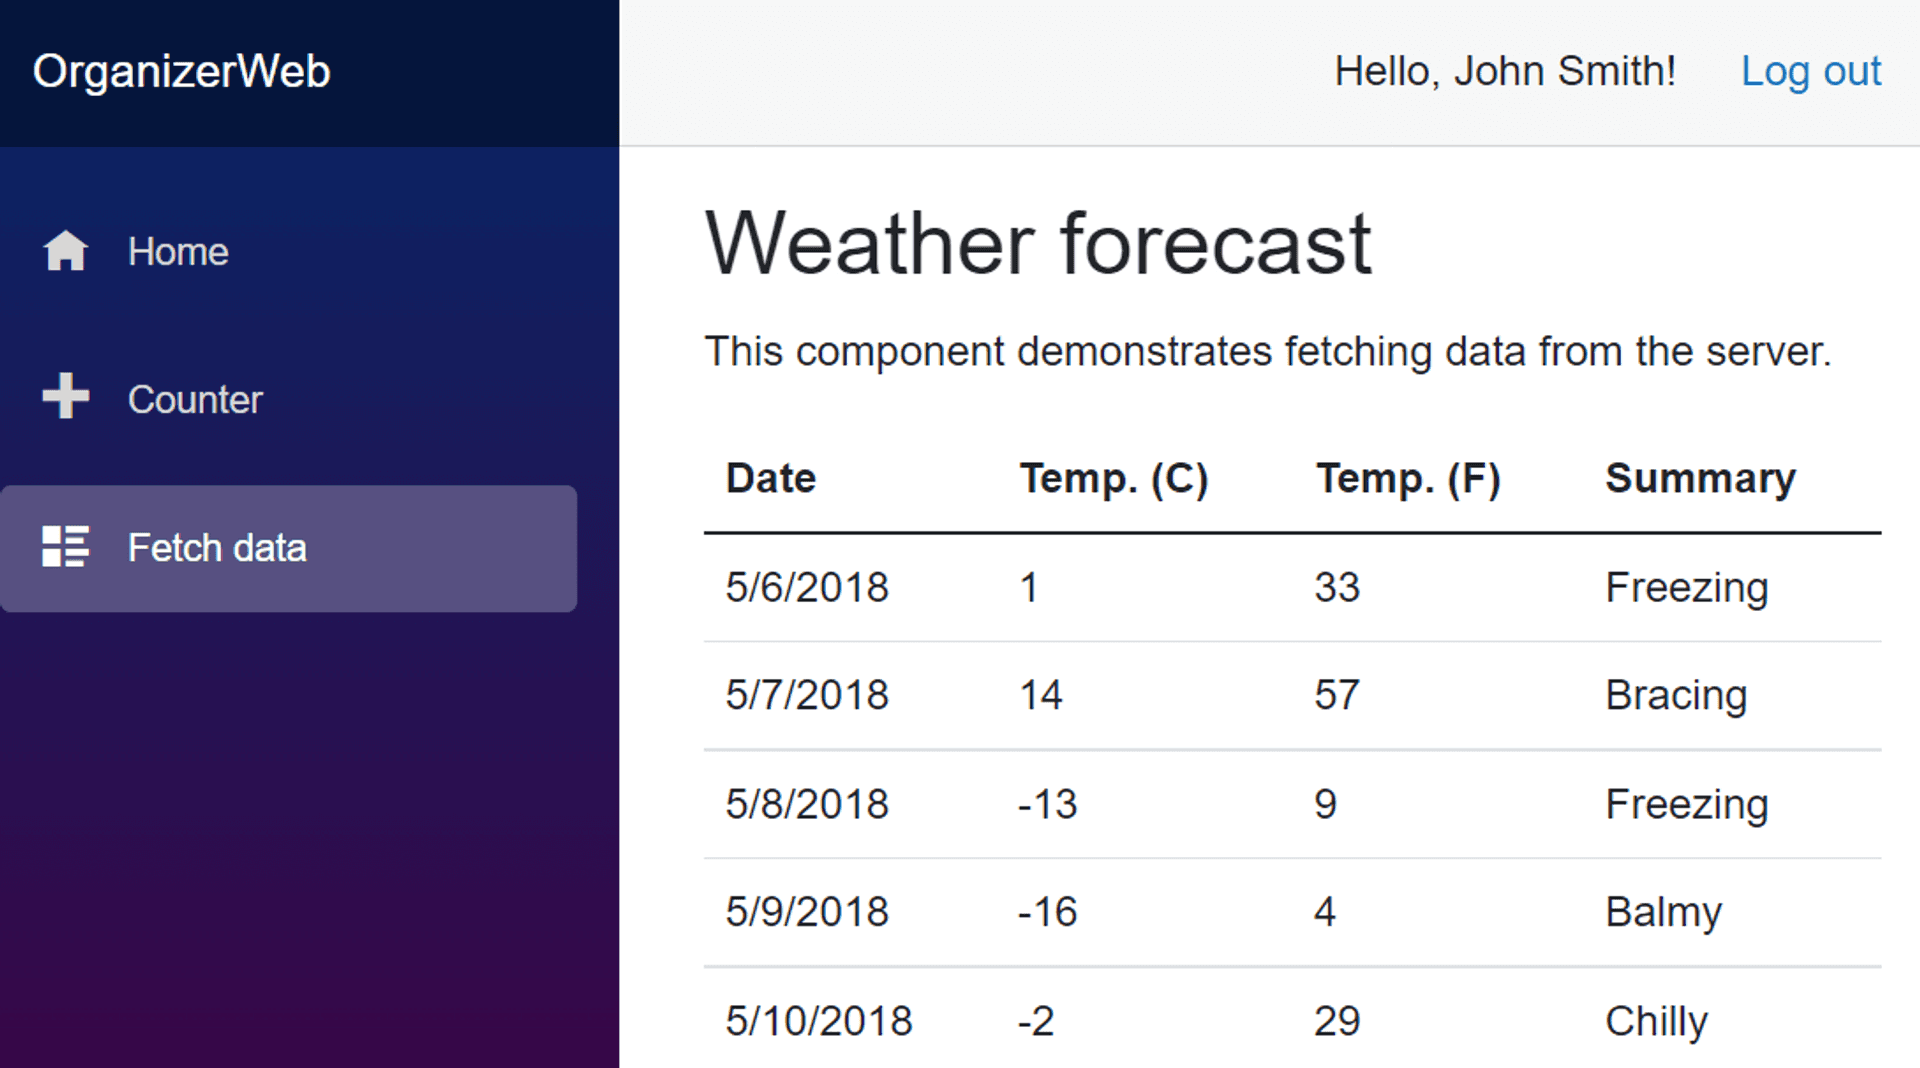 The weather forecast is displayed with John Smith as logged in user